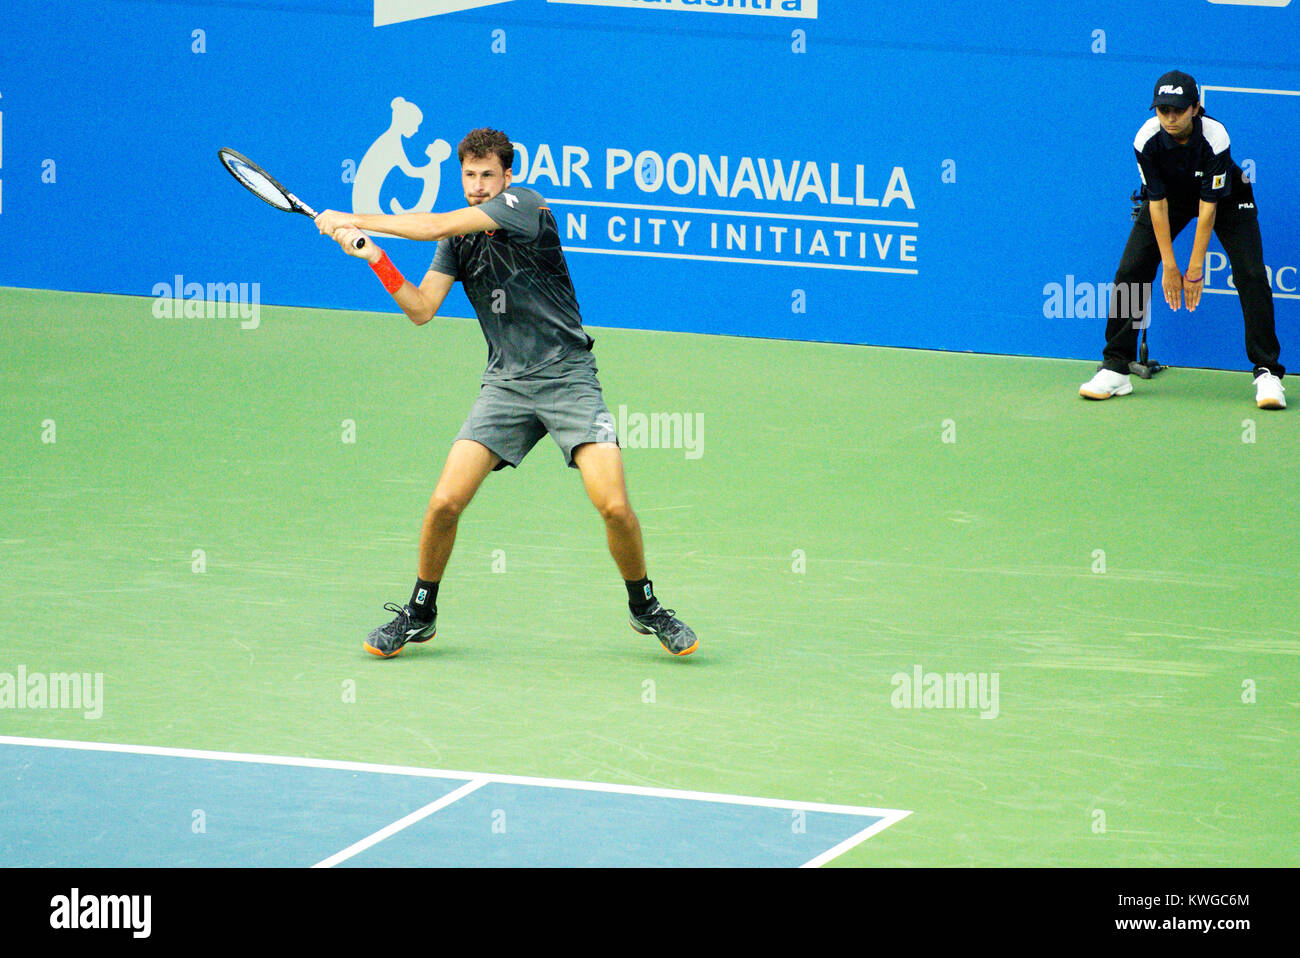 Pune, India. 2nd Jan, 2018. Robin Haase of the Netherlands in action in the first round of Singles competition at Tata Open Maharashtra at the Mahalunge Balewadi Tennis Stadium in Pune, India. Credit: Karunesh Johri/Alamy Live News Stock Photo